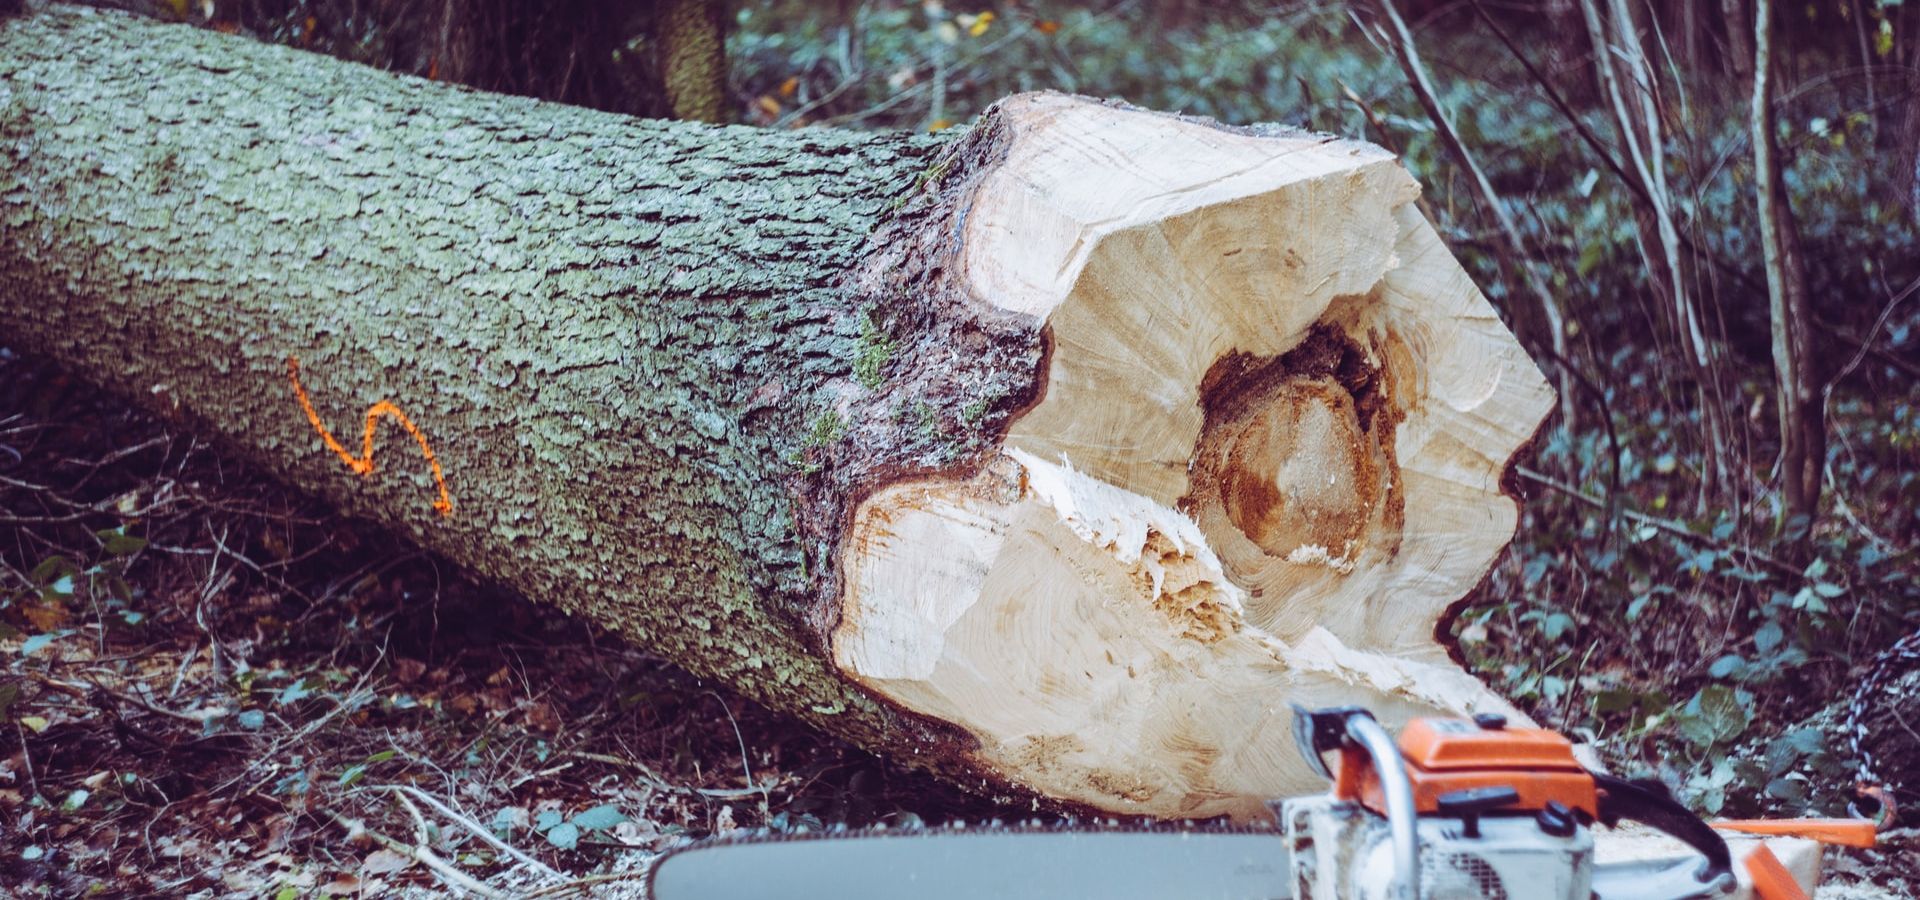 tree felling services